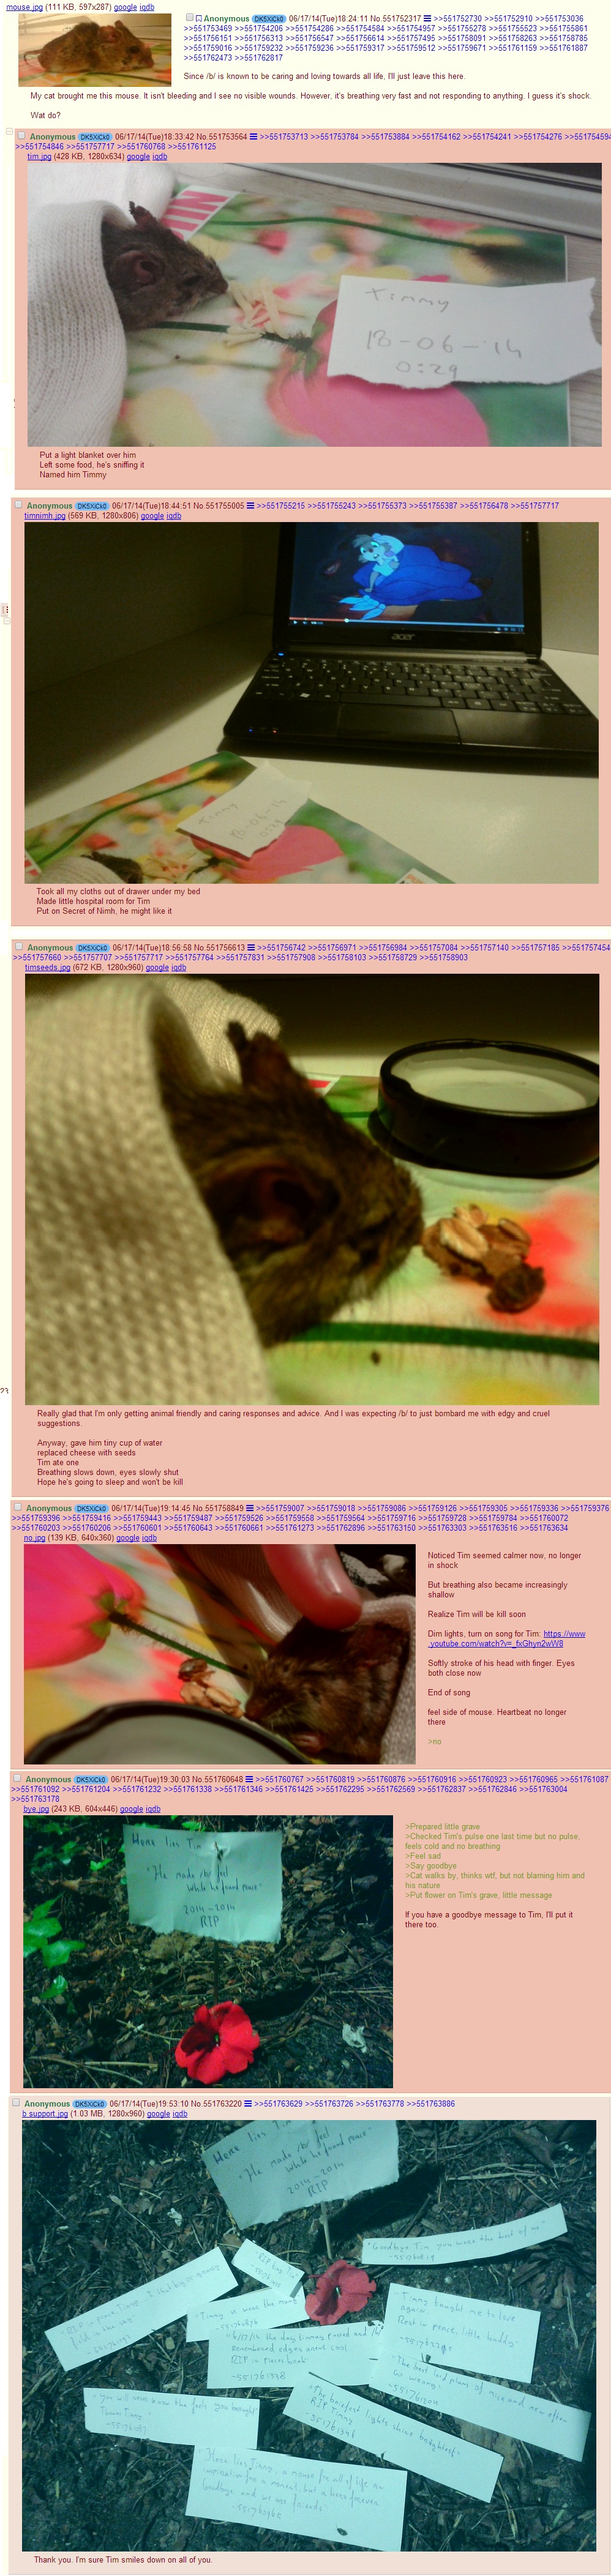 /b/ caring for Timmy.